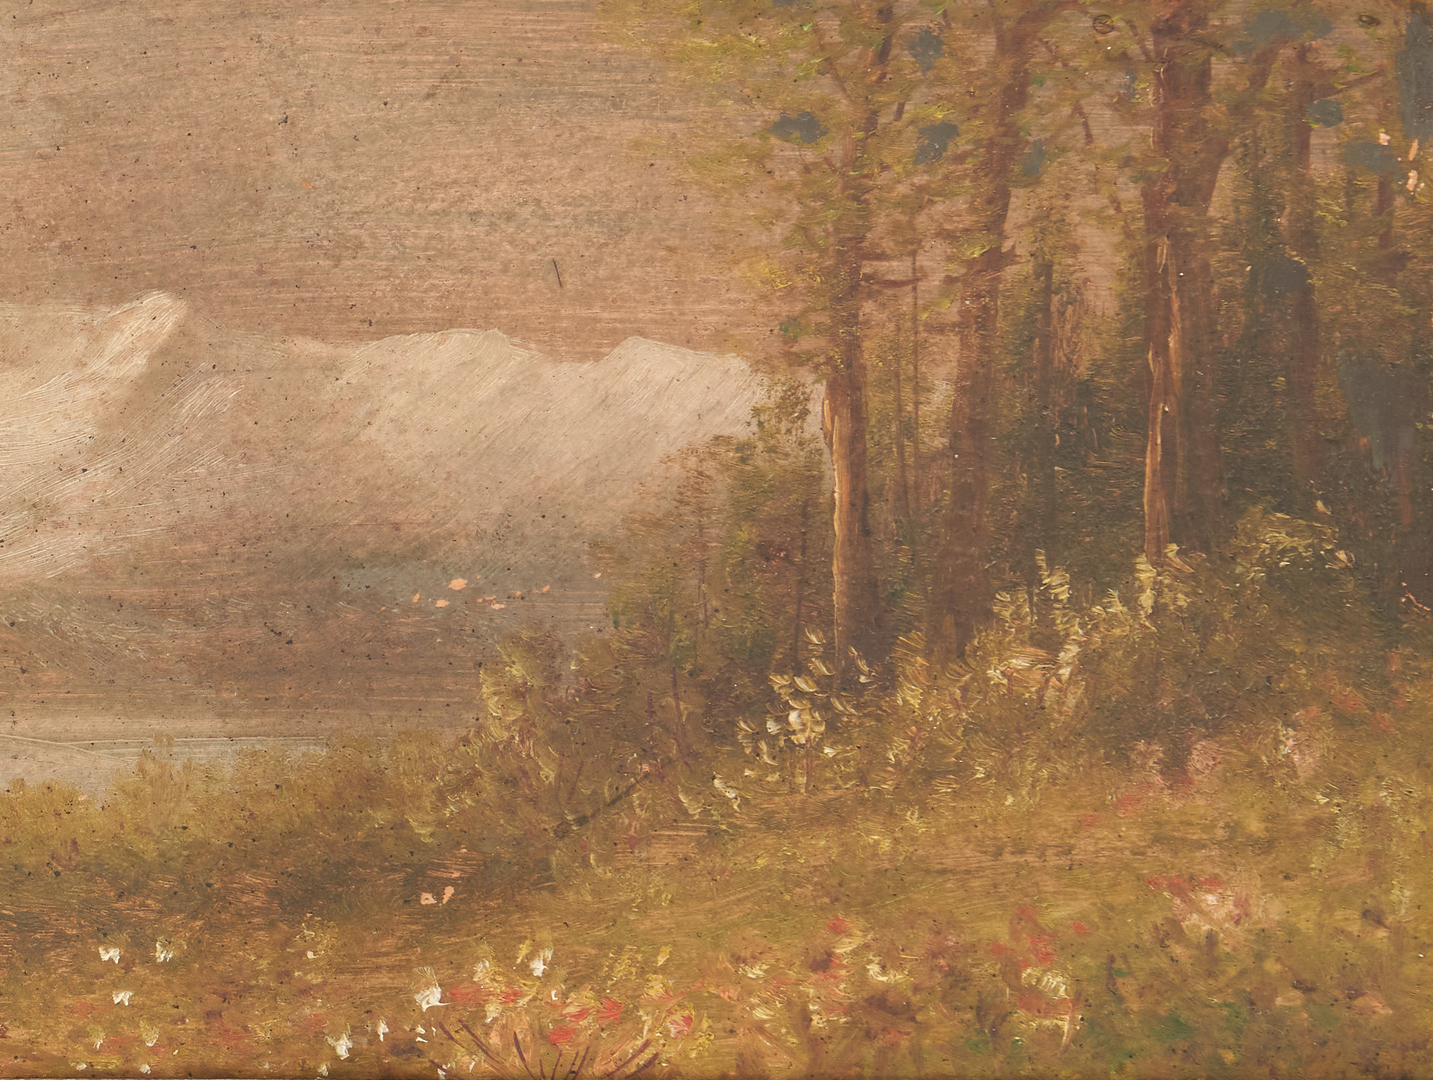 Lot 992: 2 Washington Girard paintings, Winter Landscape and Mountain in Spring